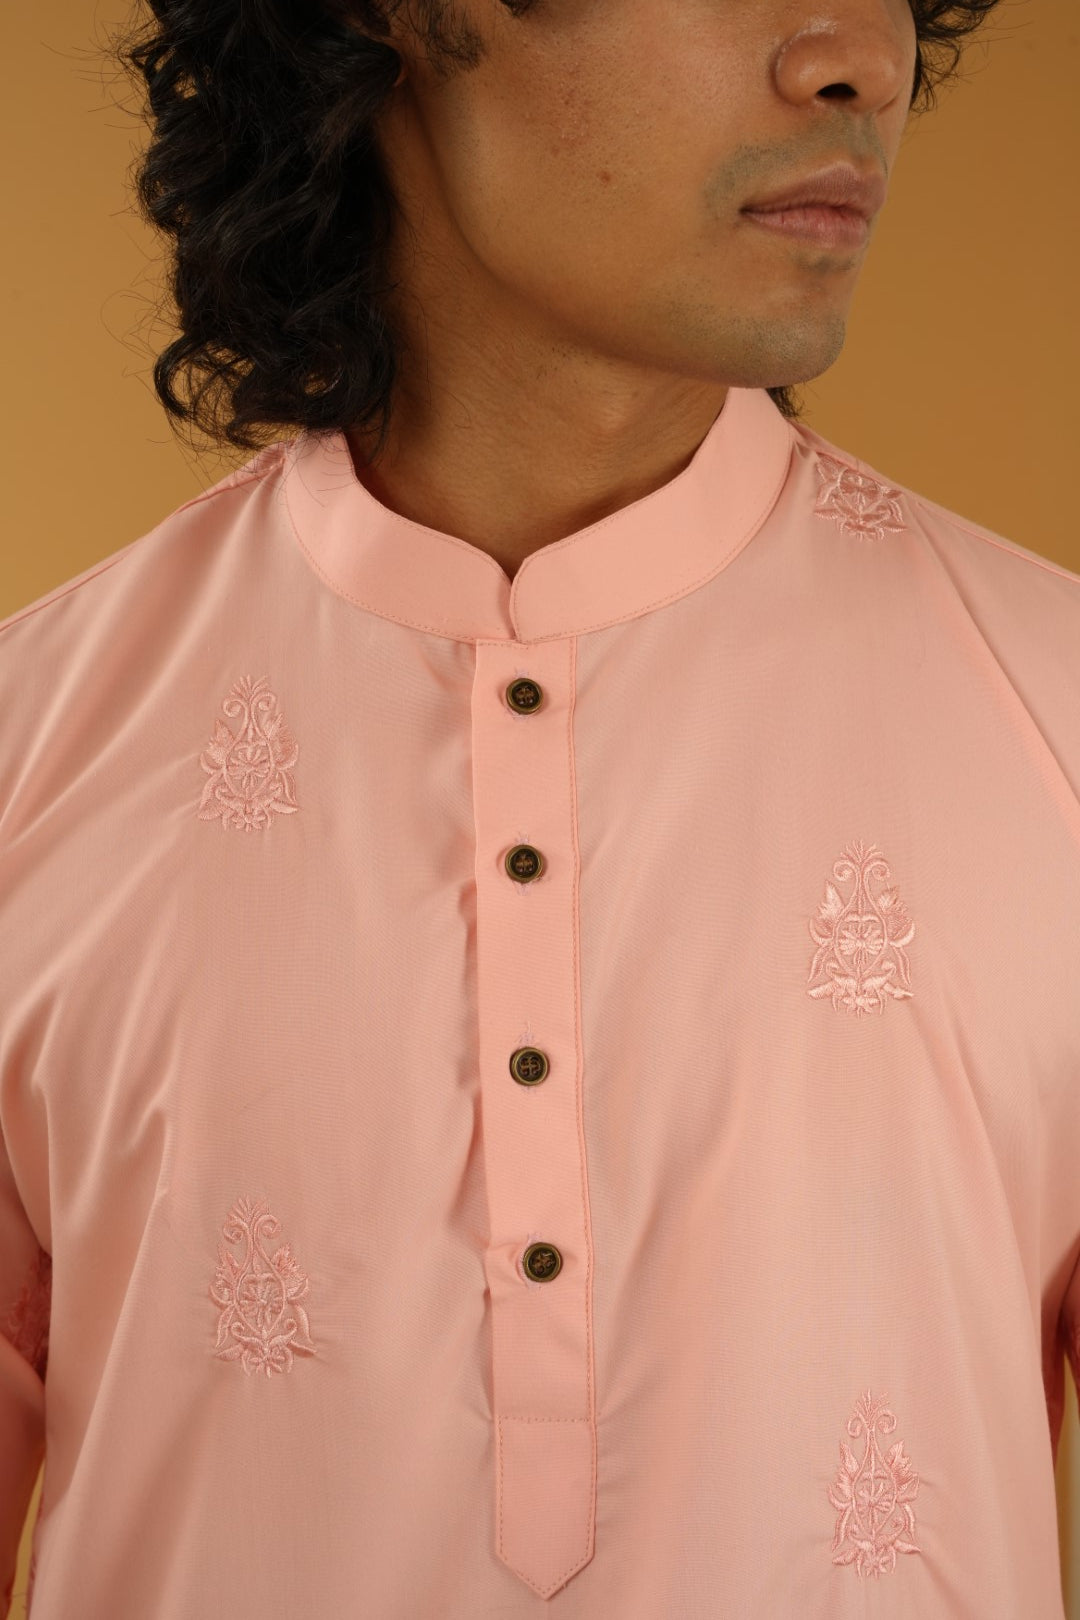 Raed All-over Embroidered Kurta in Pink - Bosphorus Fashion Ltd.